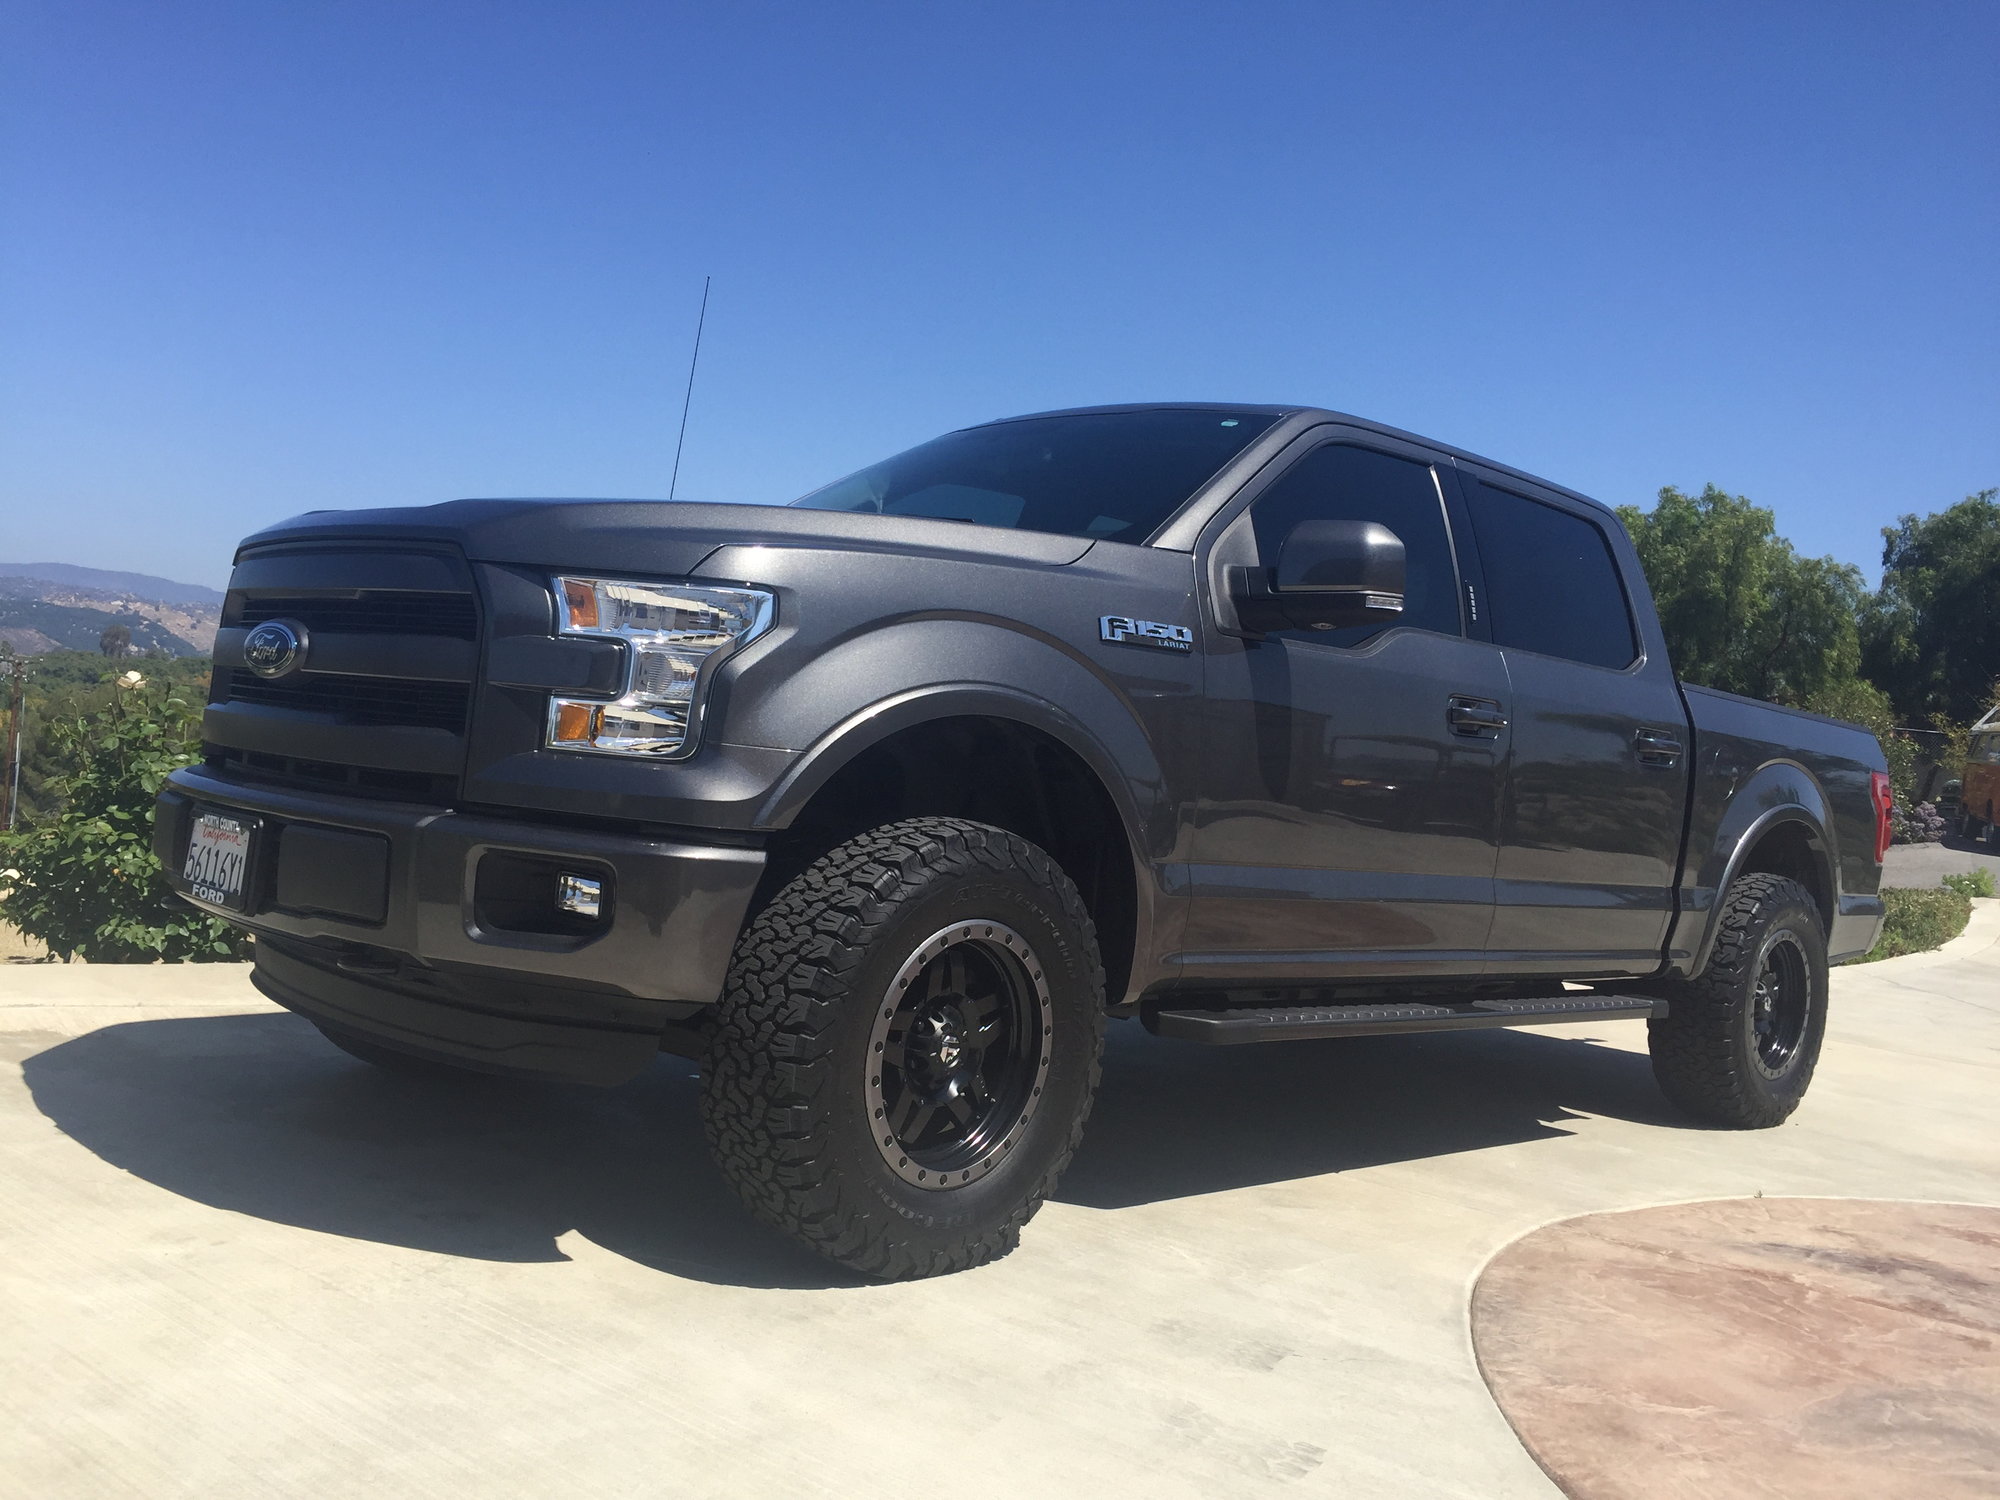 Wheel Color On Lithium Gray Truck Ford F150 Forum Community Of Ford Truck Fans